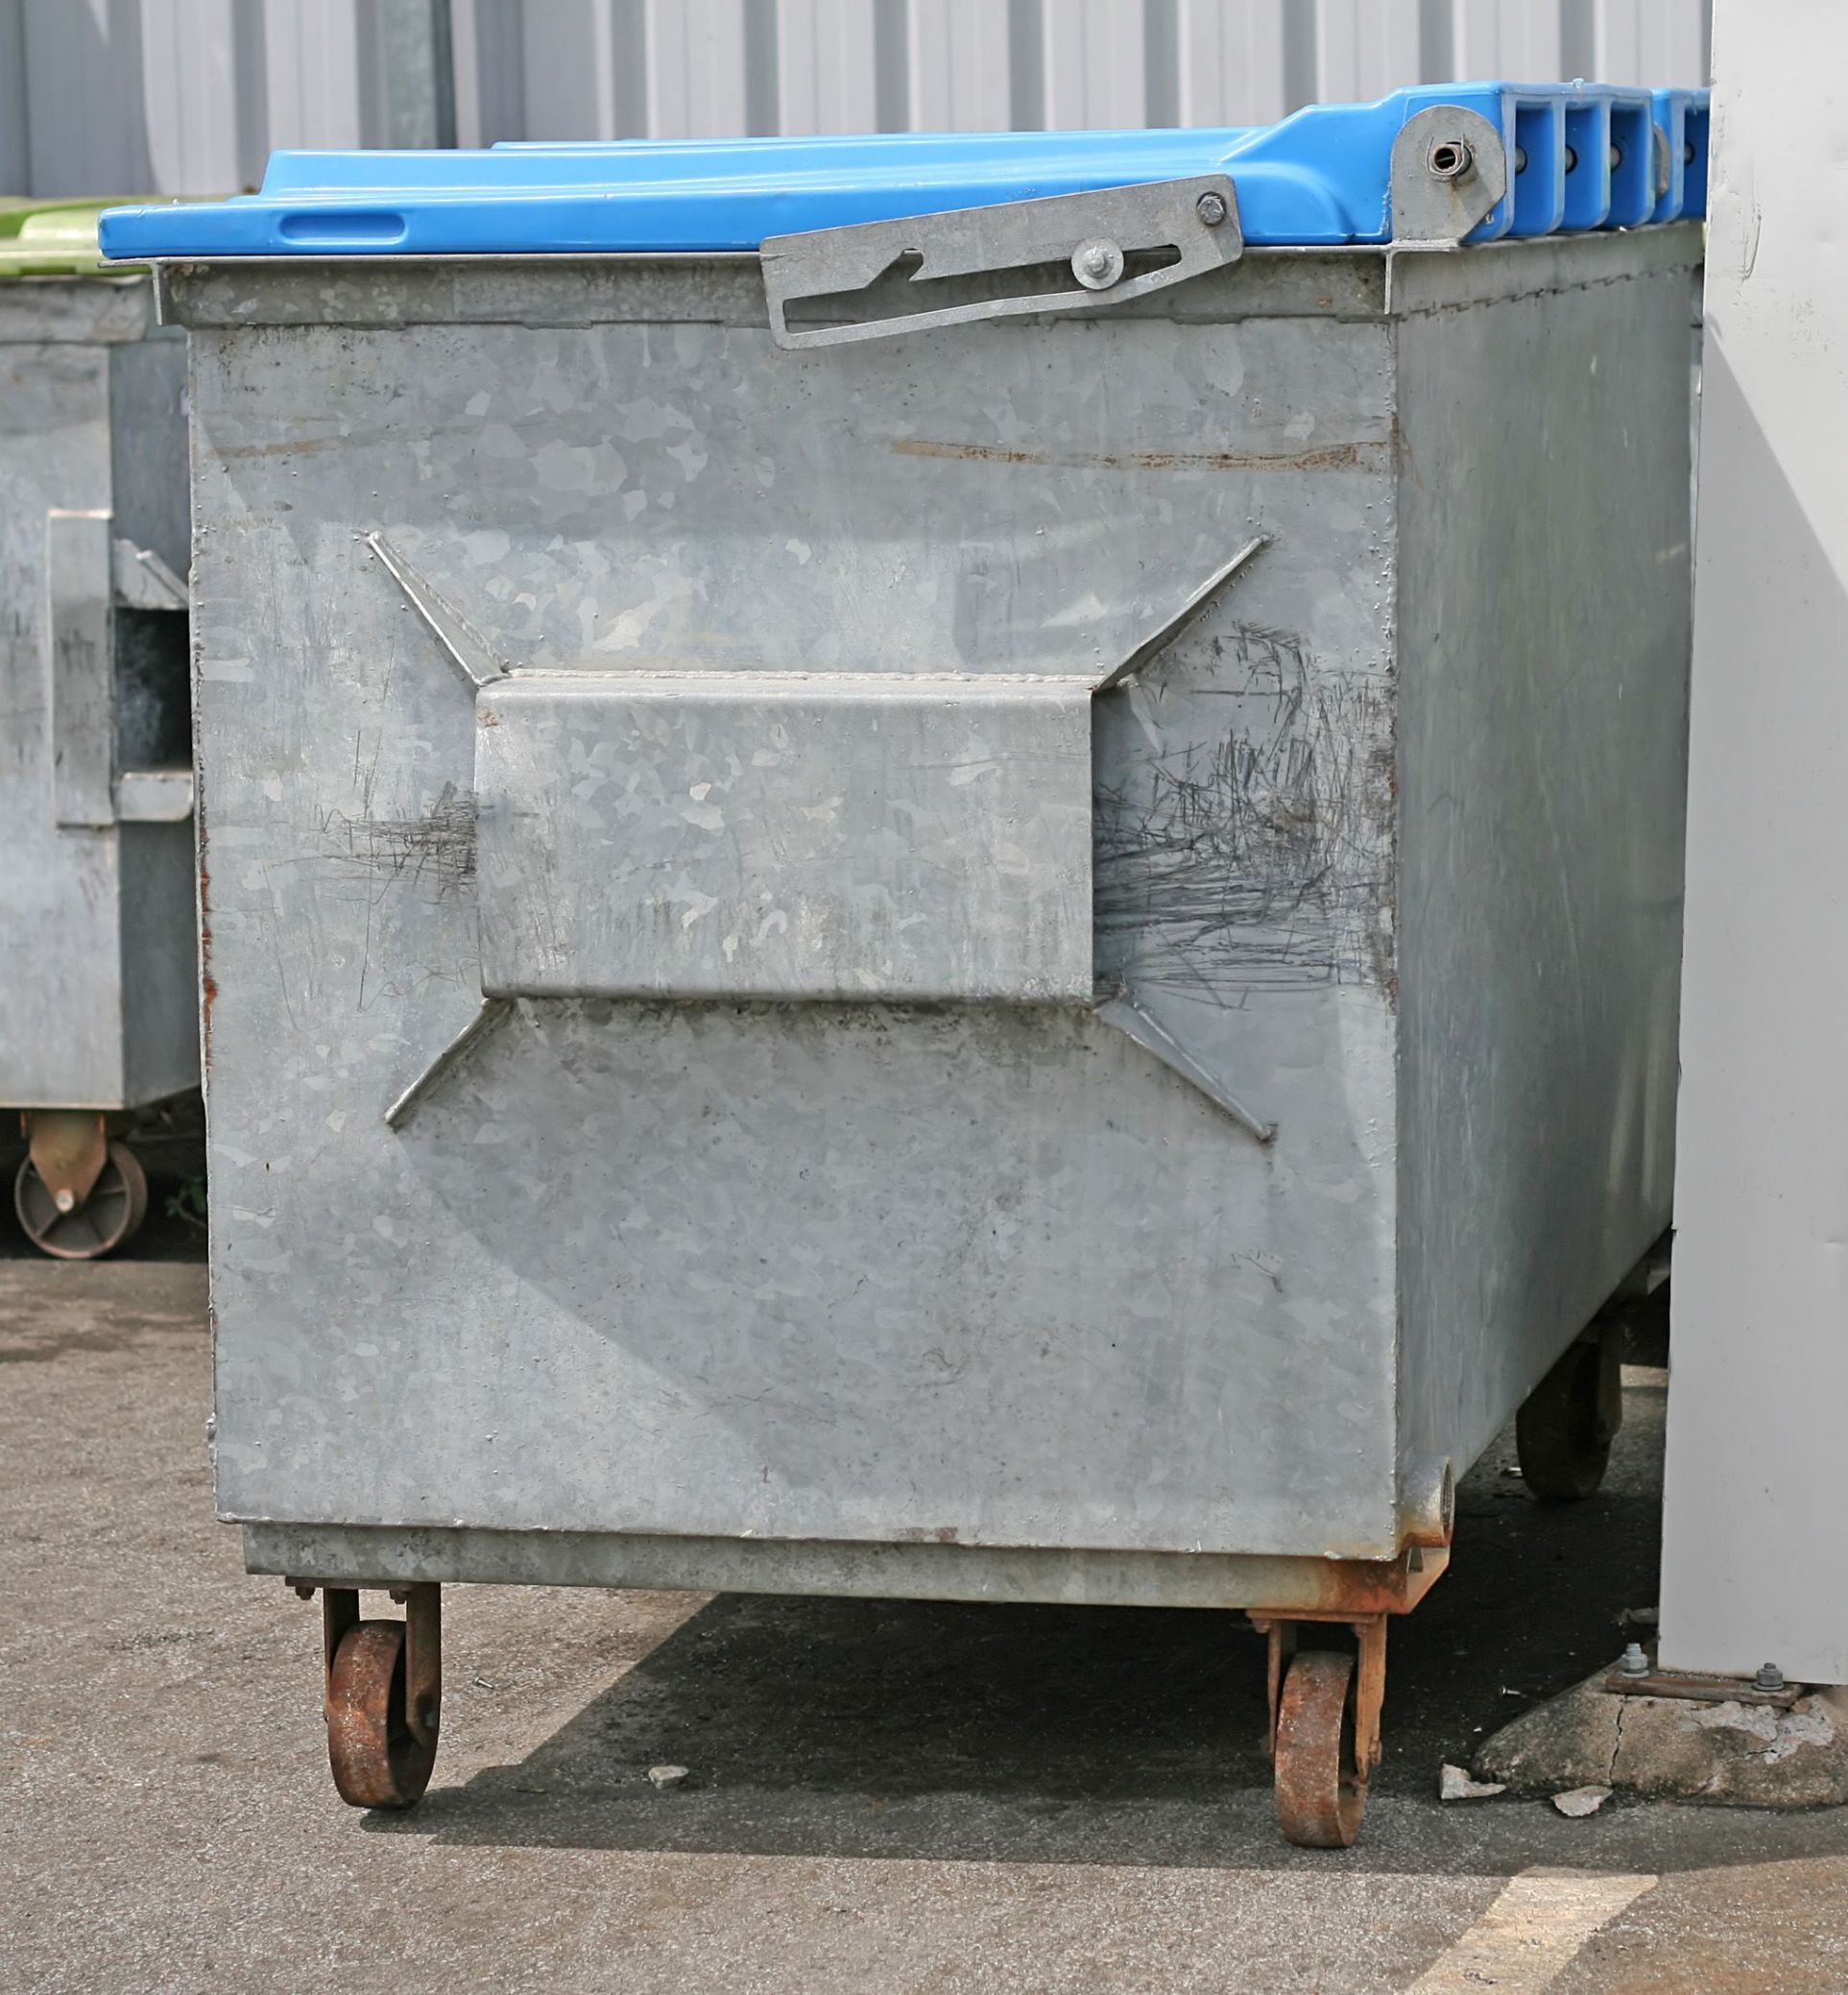 Rent a Dumpster in Baltimore, MD, For Convenient Home Projects and Events